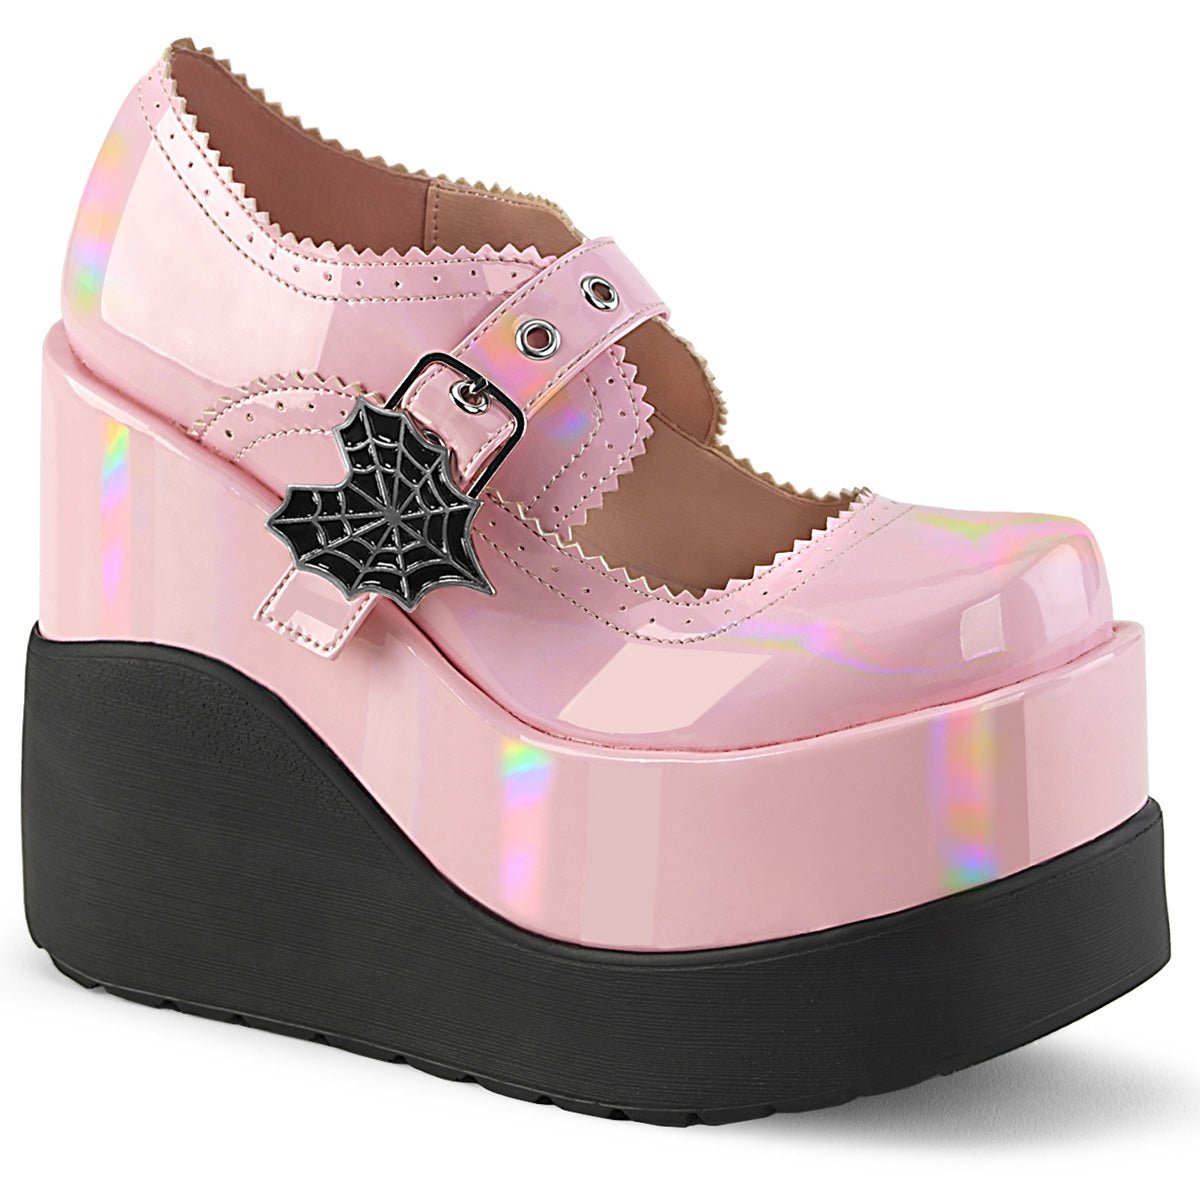 Too Fast | Demonia VOID-38 | Baby Pink Hologram Patent Mary Janes